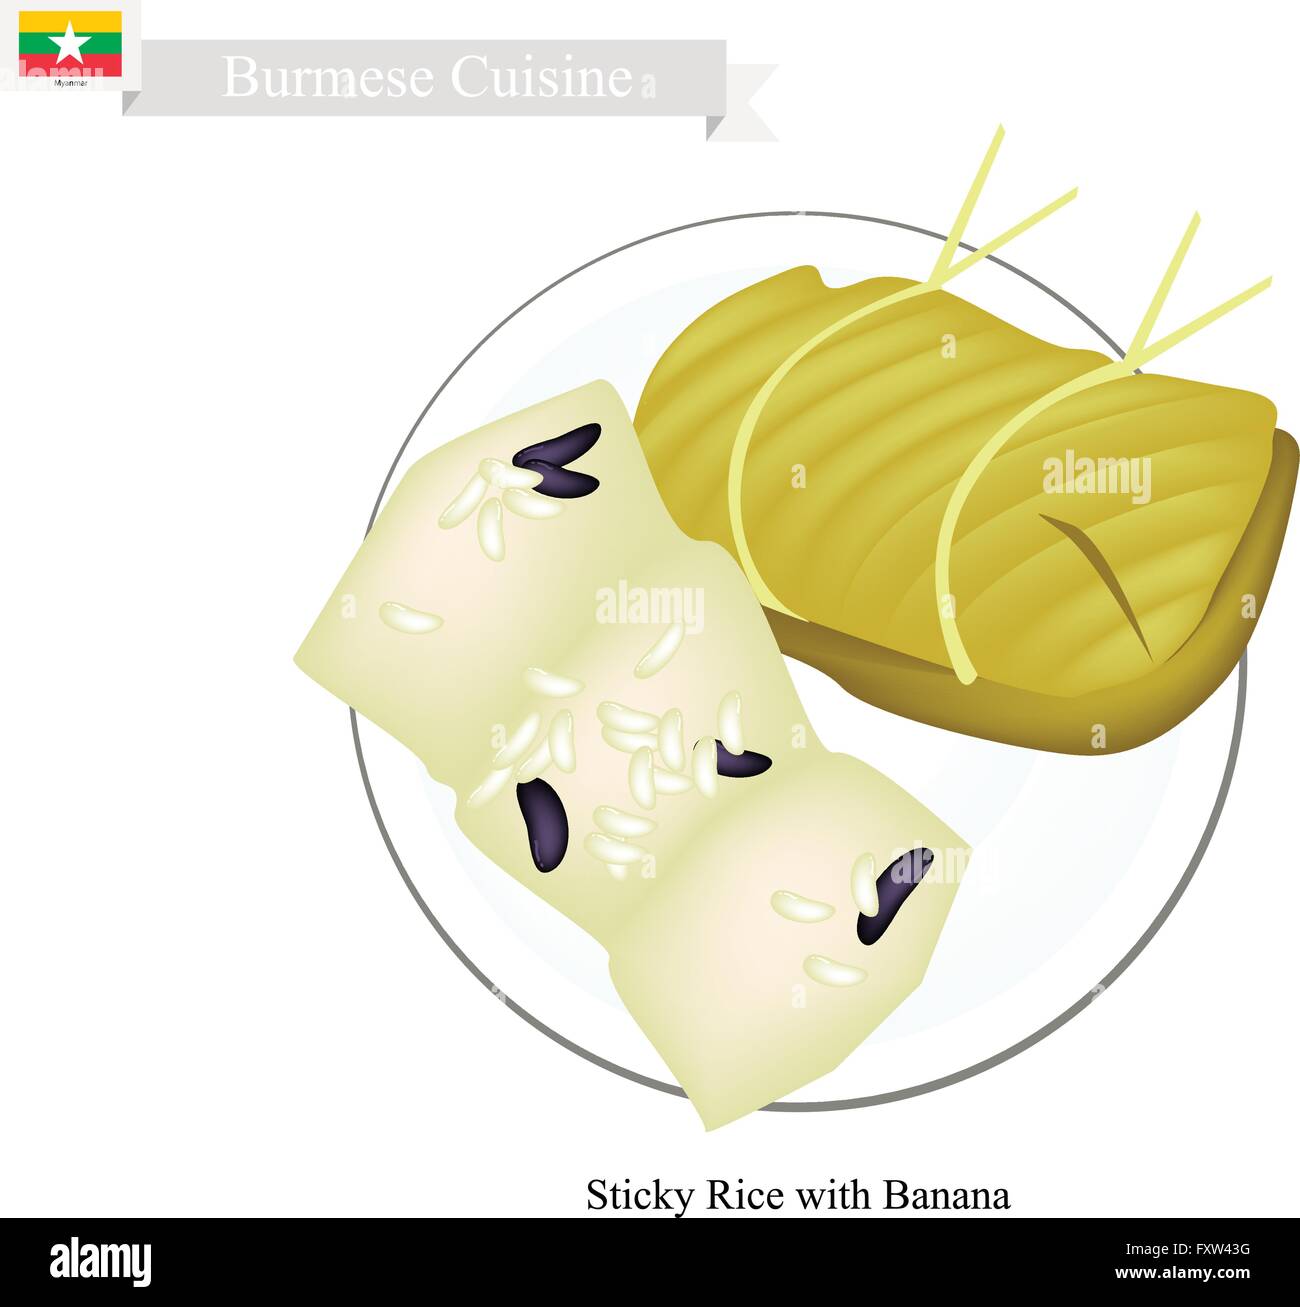 Burmese Cuisine, Bananas in Sticky Rice Wrap with Banana Leaves. One of The Most Popular Dessert in Myanmar. Stock Vector